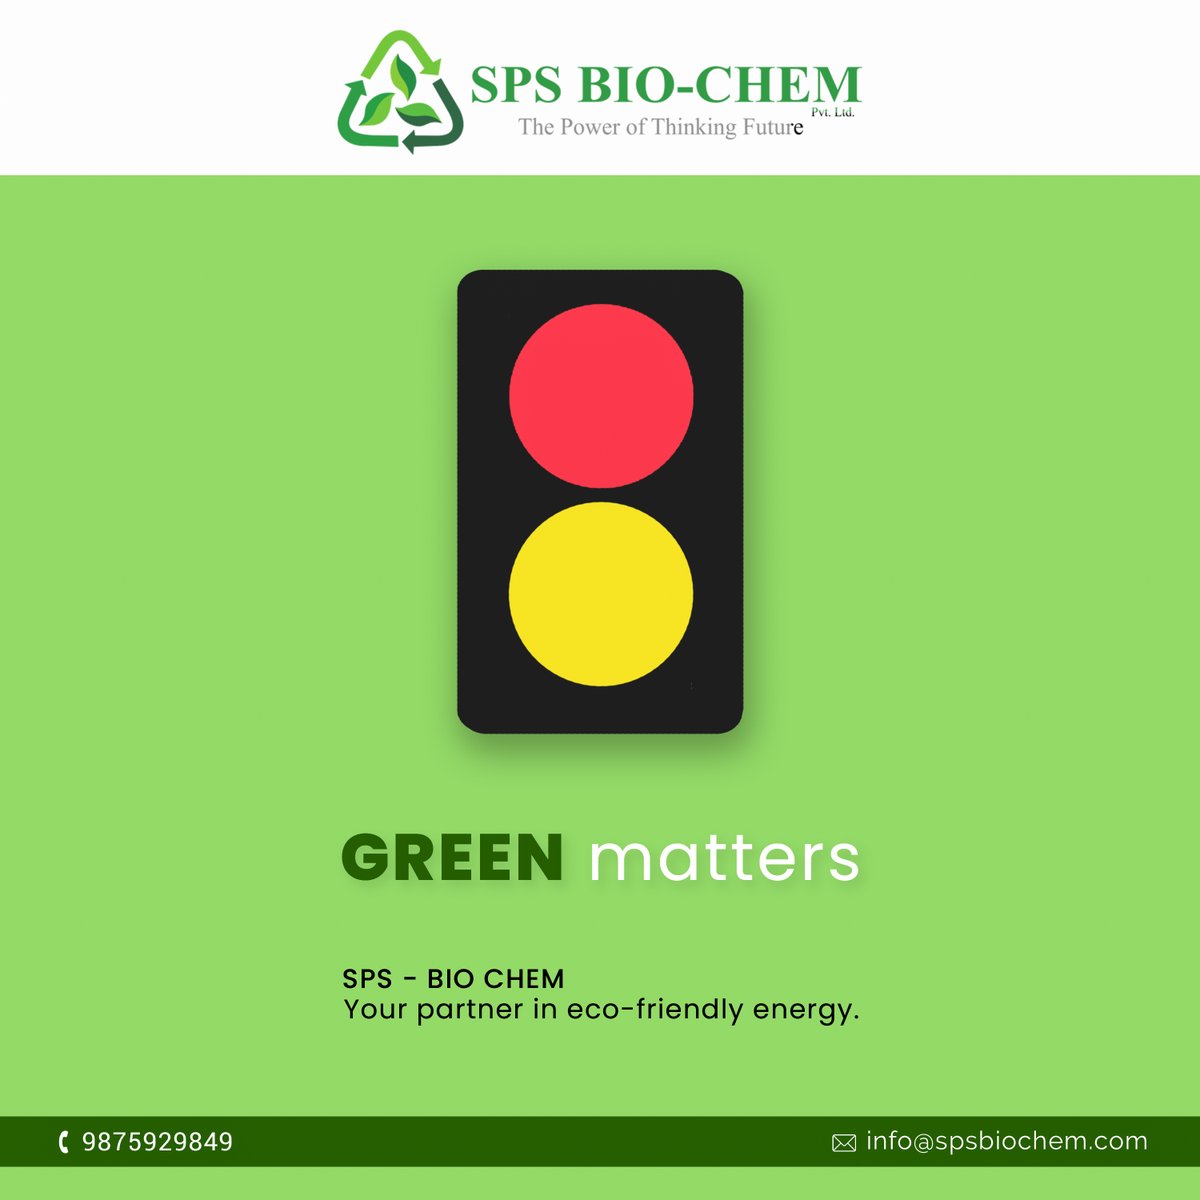 Without the green light of sustainable energy, progress comes to a halt. Join us in making a difference for the planet and take the first step towards a brighter, more sustainable future. #redlight #green #greenenergy #ecofriendly #sustainable #agricultura #soilfertility